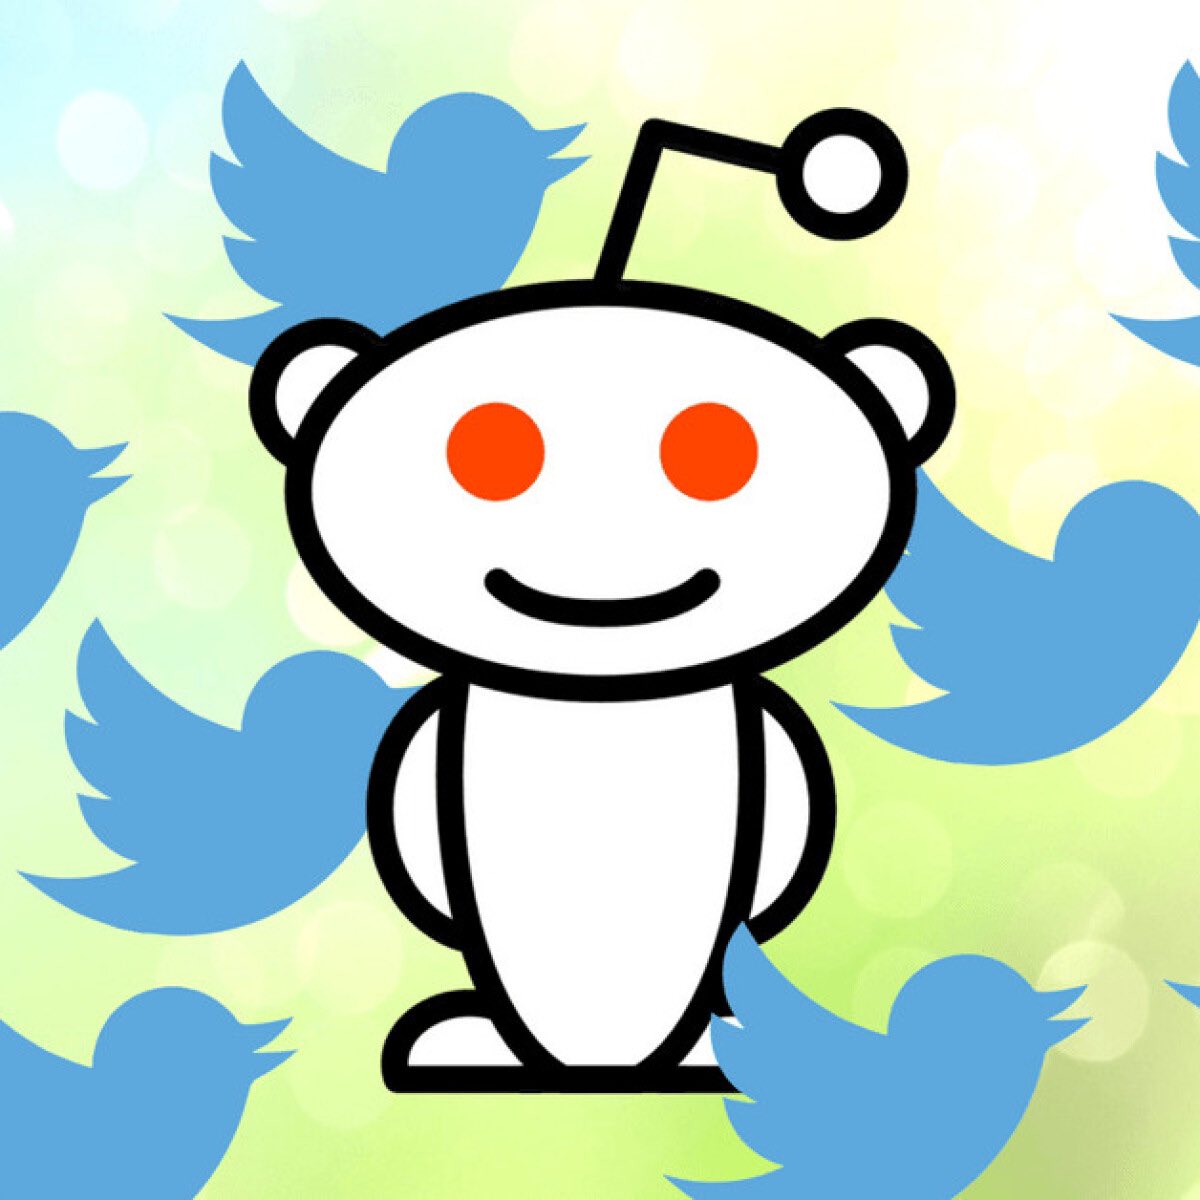 Never underestimate the power of community. 

With a shared purpose and passion, the $Reddit community has sparked a movement, giving birth to a new revolution.  

Together we build. 

#PowerOfCommunity = $REDDIT

#SparkAMovement = $REDDIT

#NewRevolution = $REDDIT 

Telegram -…